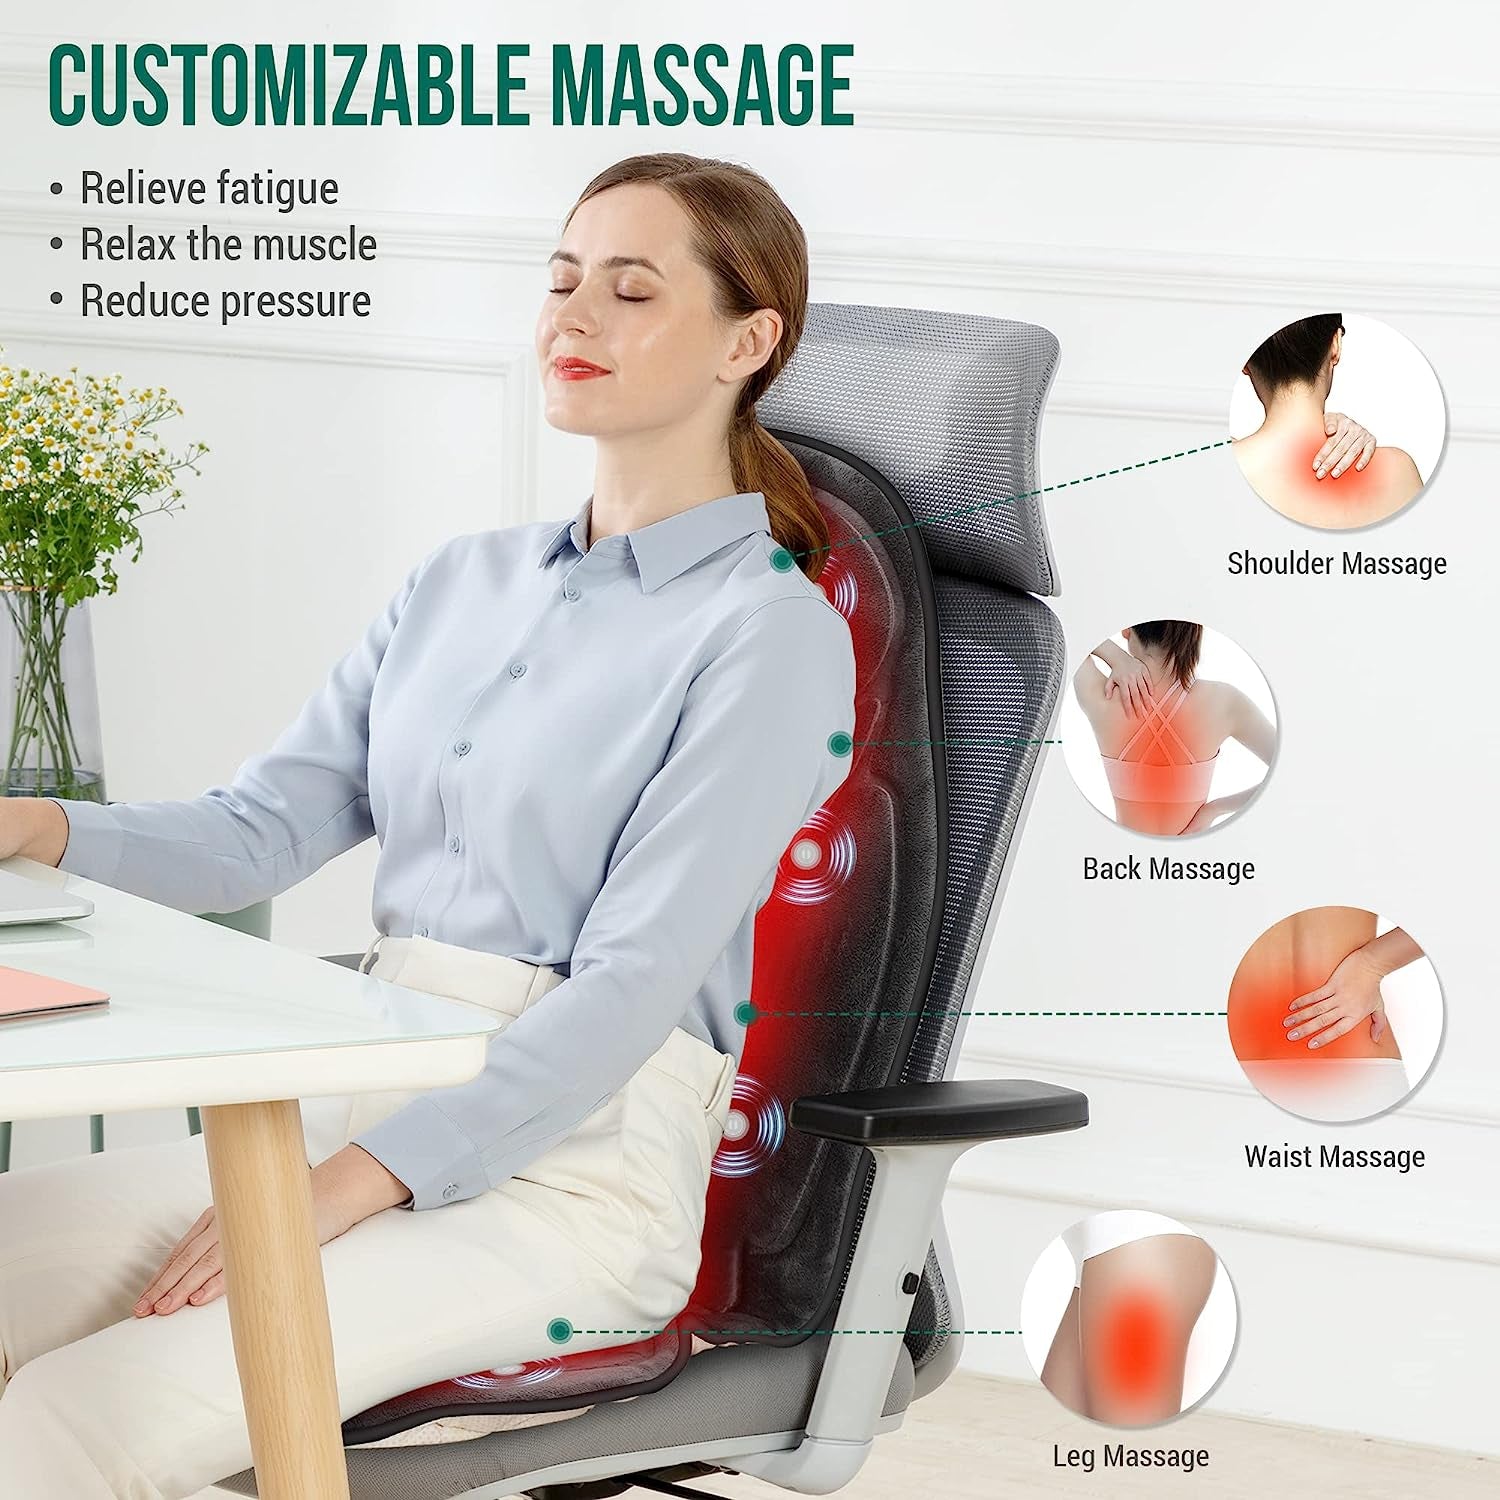 "Ultimate Comfort and Relaxation: Snailax Memory Foam Back Massage Seat Cushion with 5 Massage Modes, 2 Heat Settings - Perfect for Office Chair and Home Use"